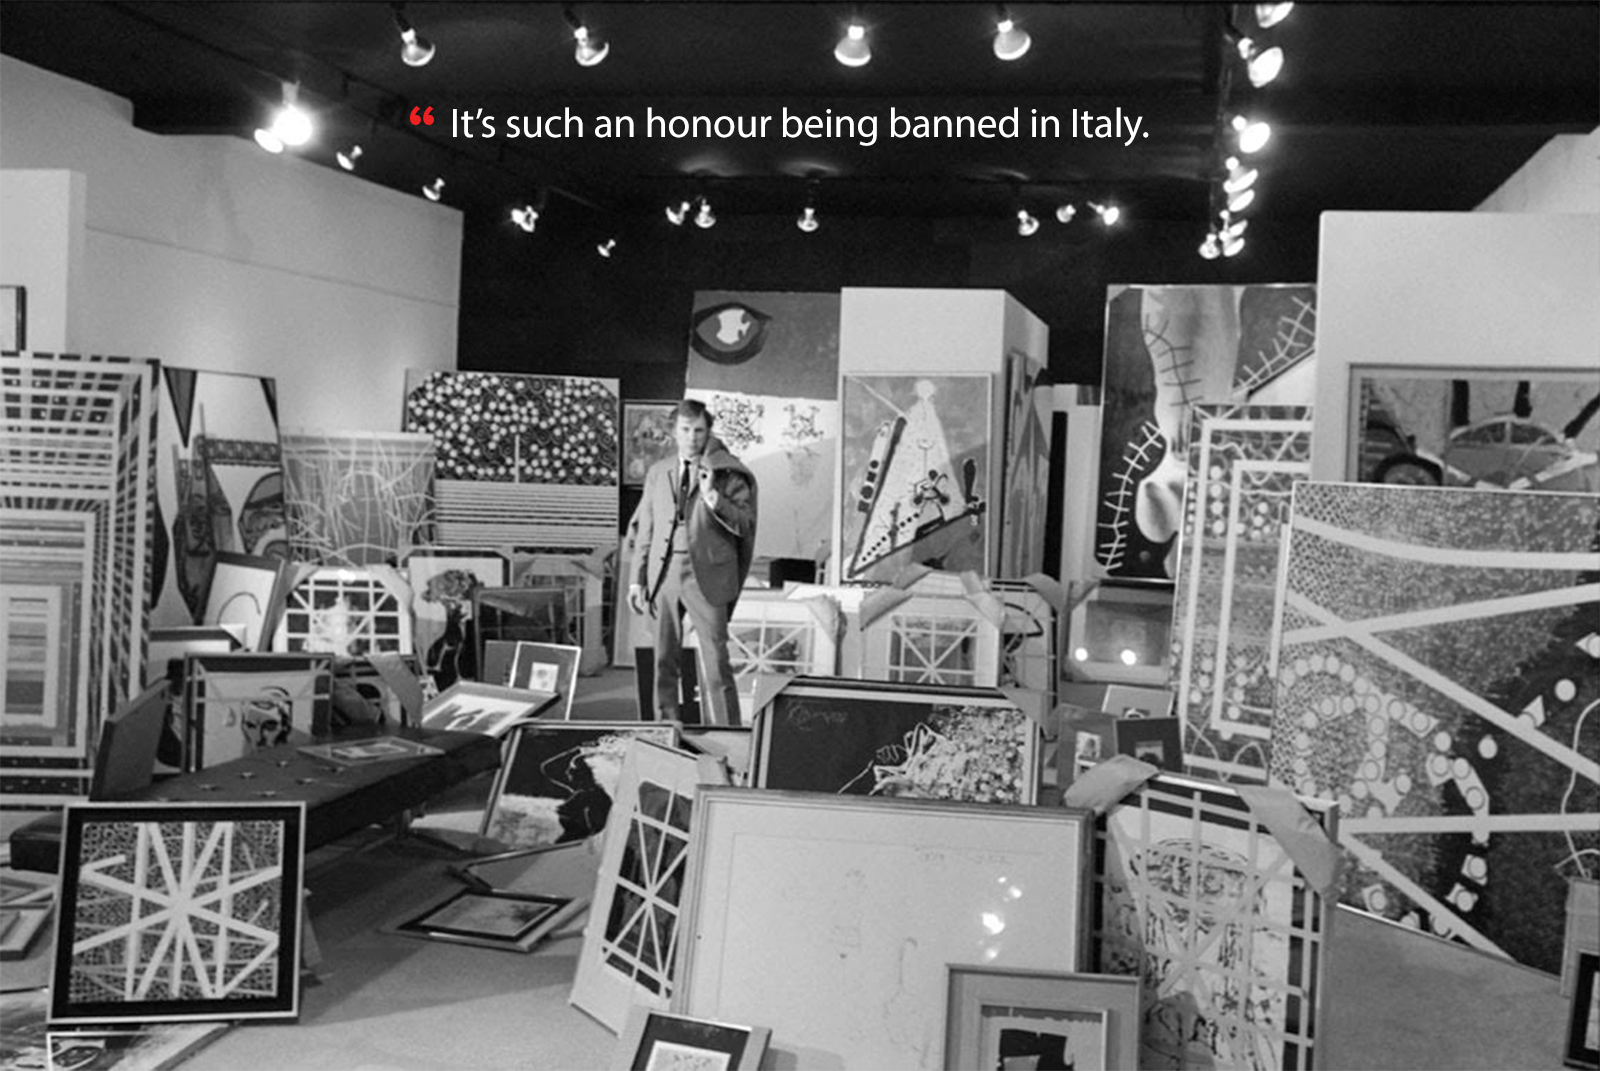 It’s such an honour being banned in Italy.